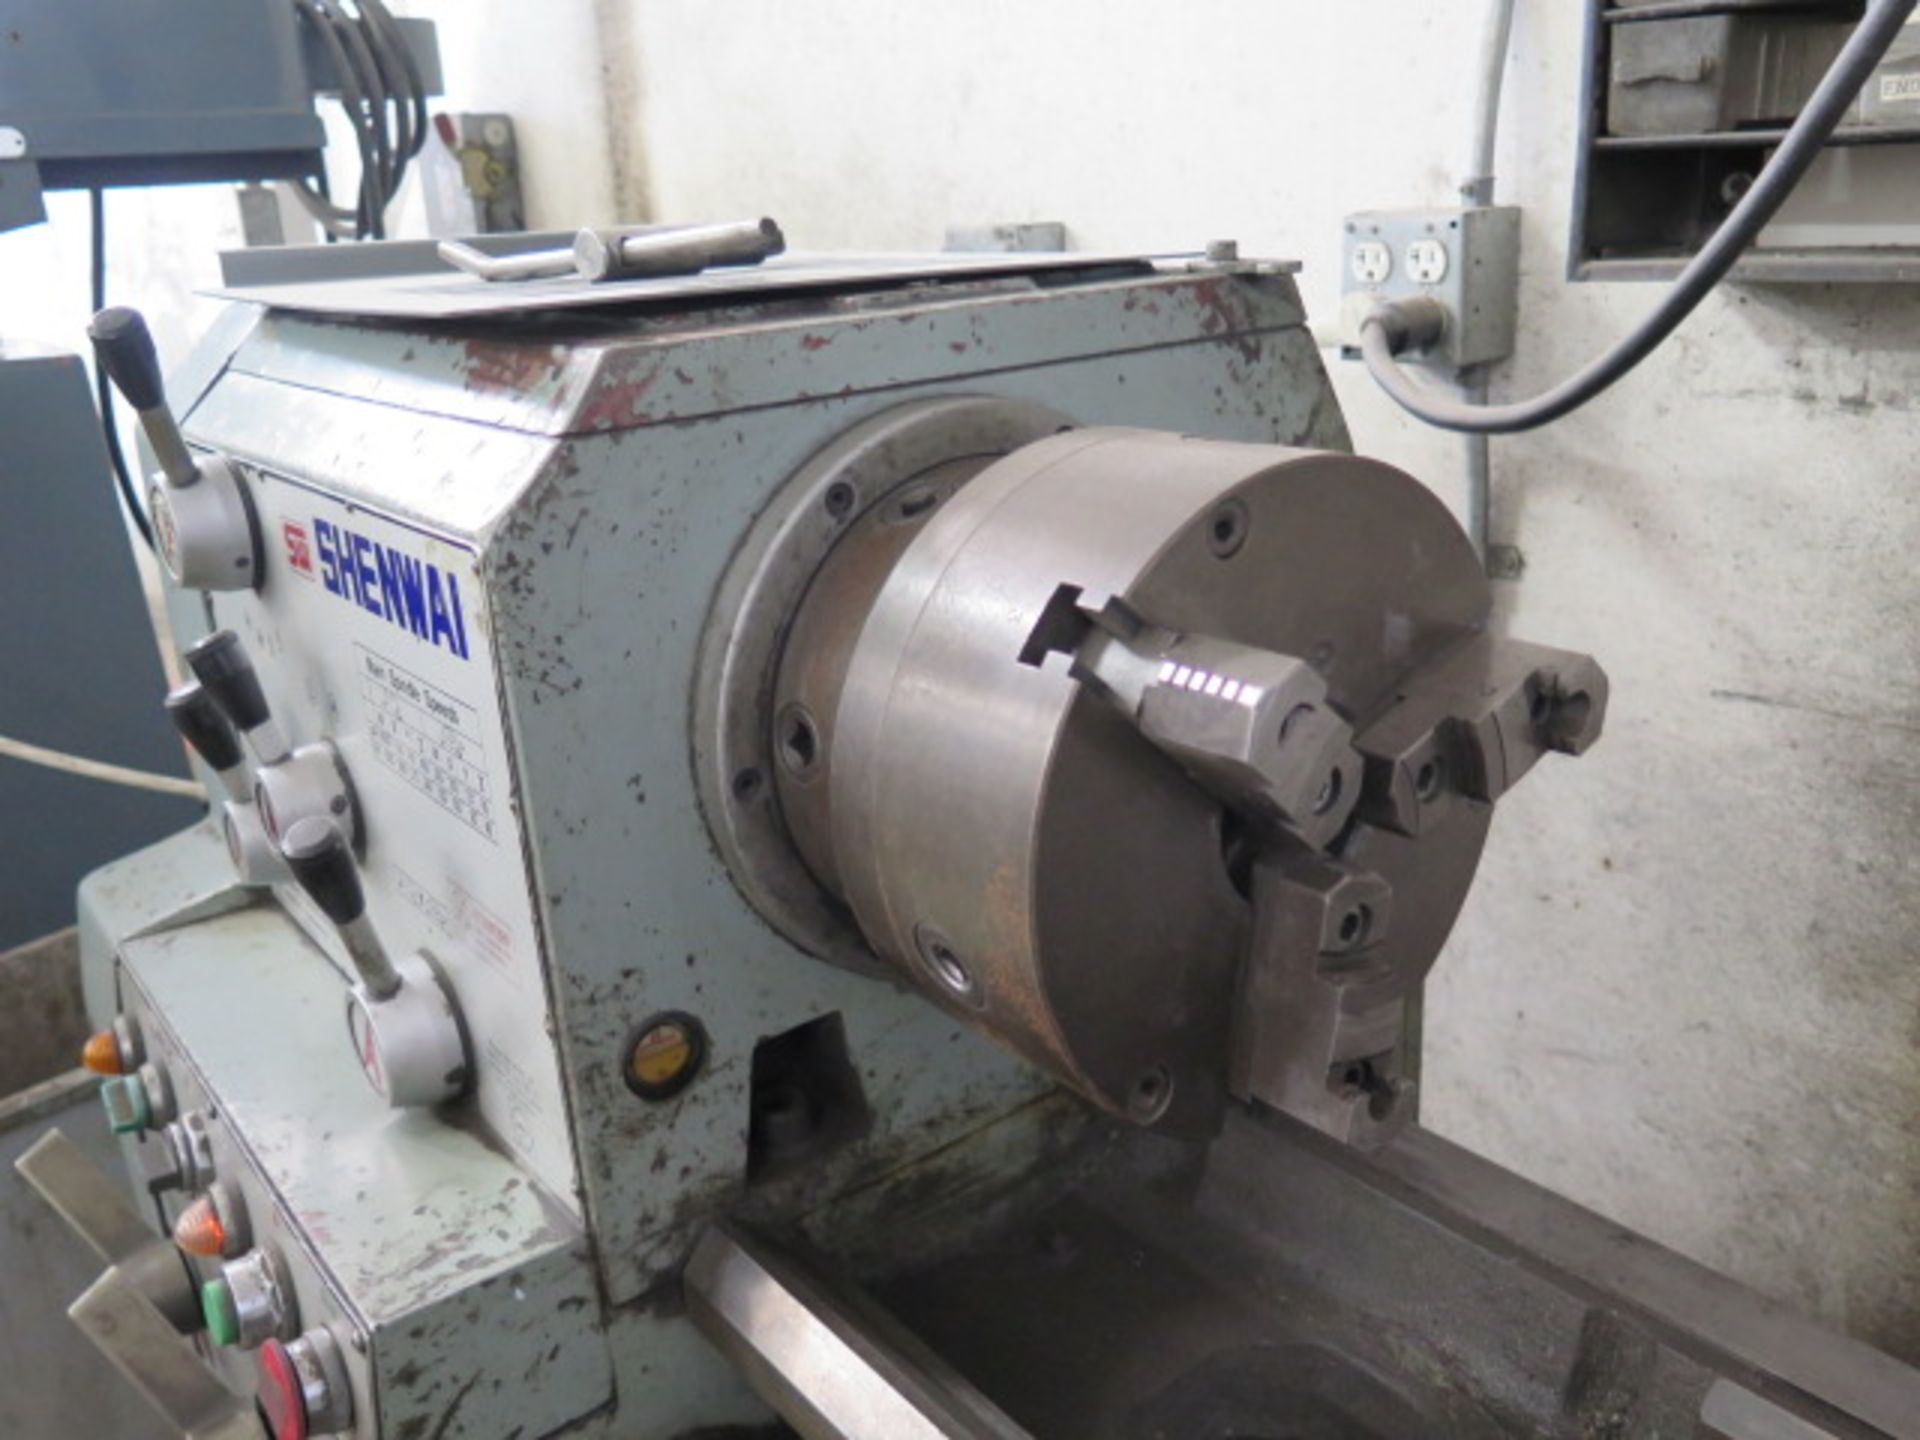 SW Shenwai “Chieftain” 15” x 40” Geared Head Gap Lathe s/n 10449 w/ 40-1800 RPM, Inch/mm, SOLD AS IS - Image 6 of 12